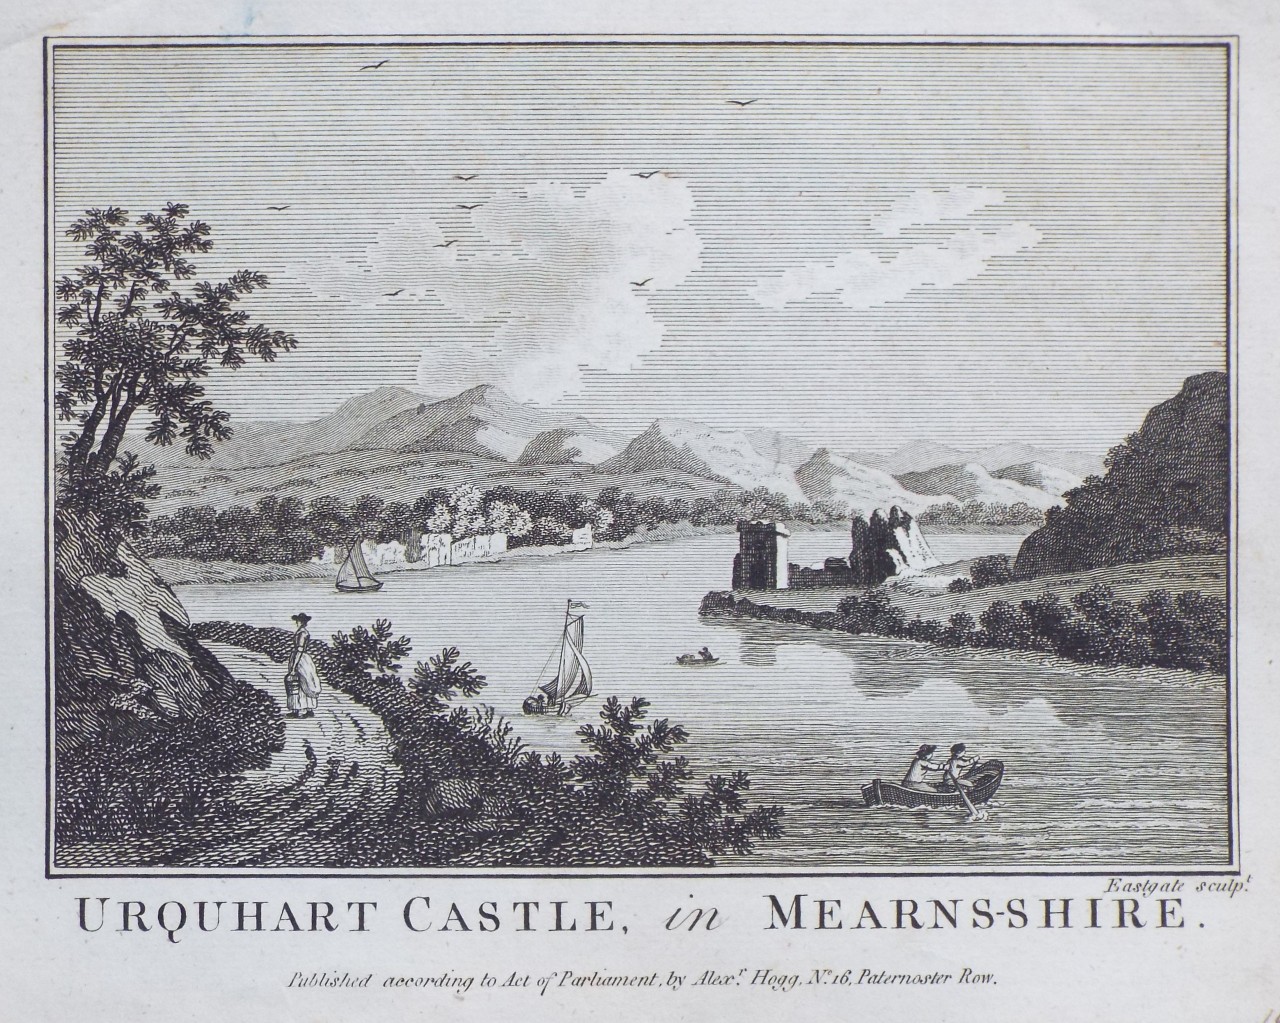 Print - Urquhart Catle, in Mearns-shire.